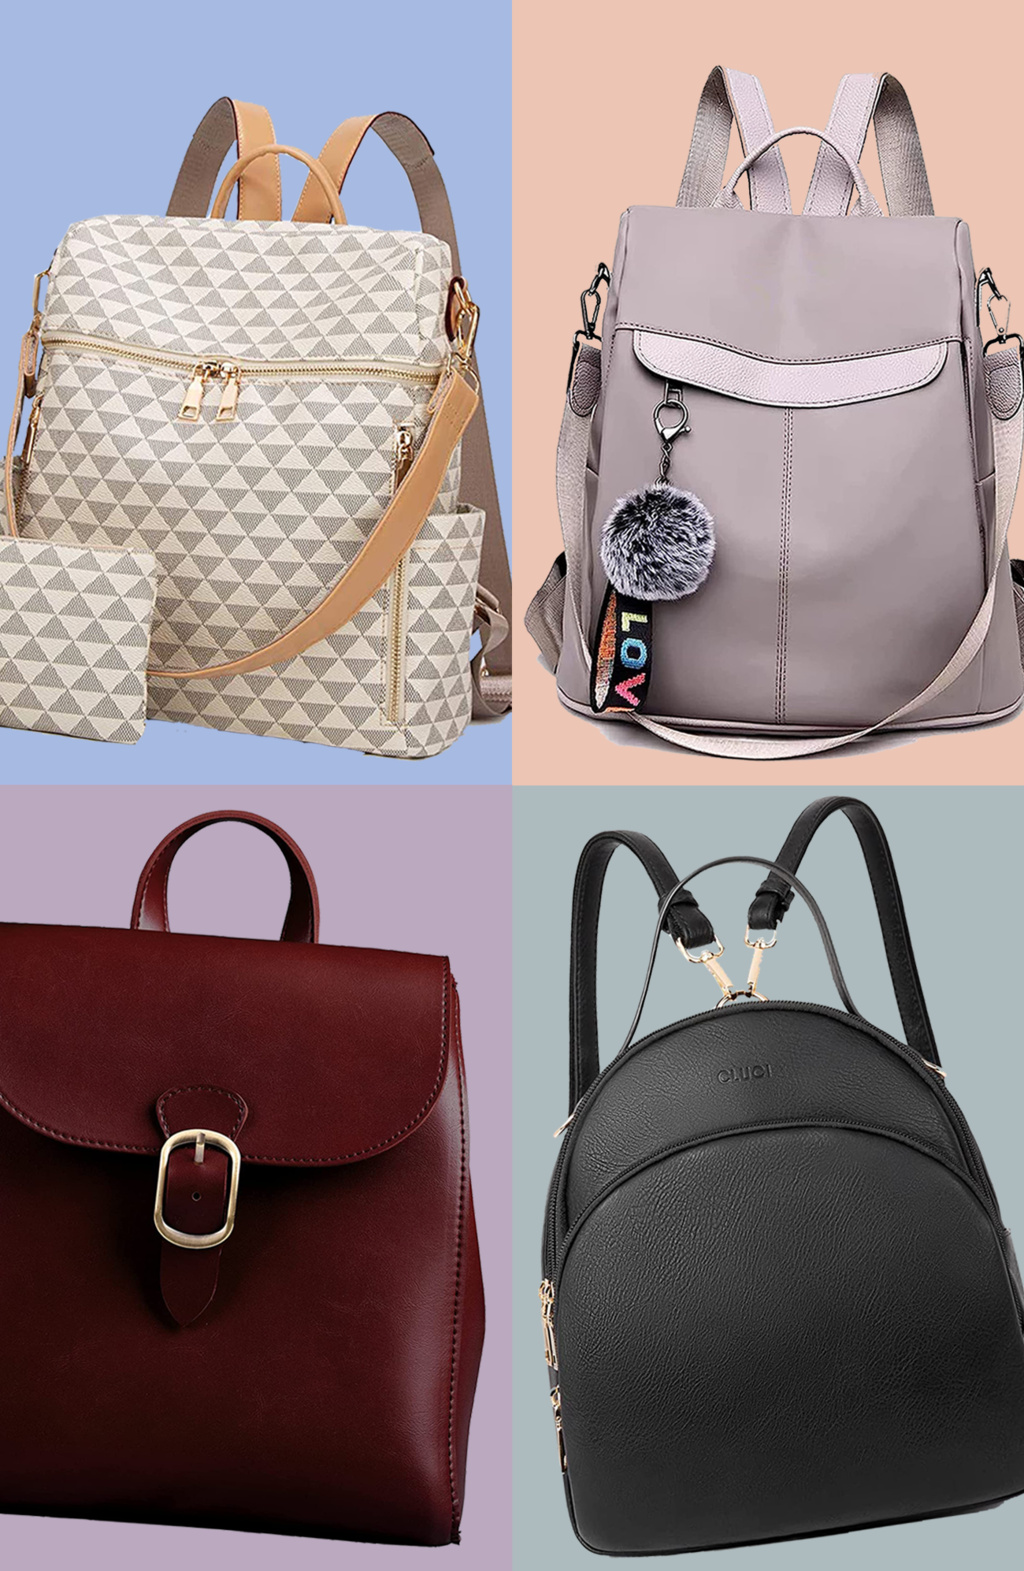 Amazon Backpack Purses that We’re Loving